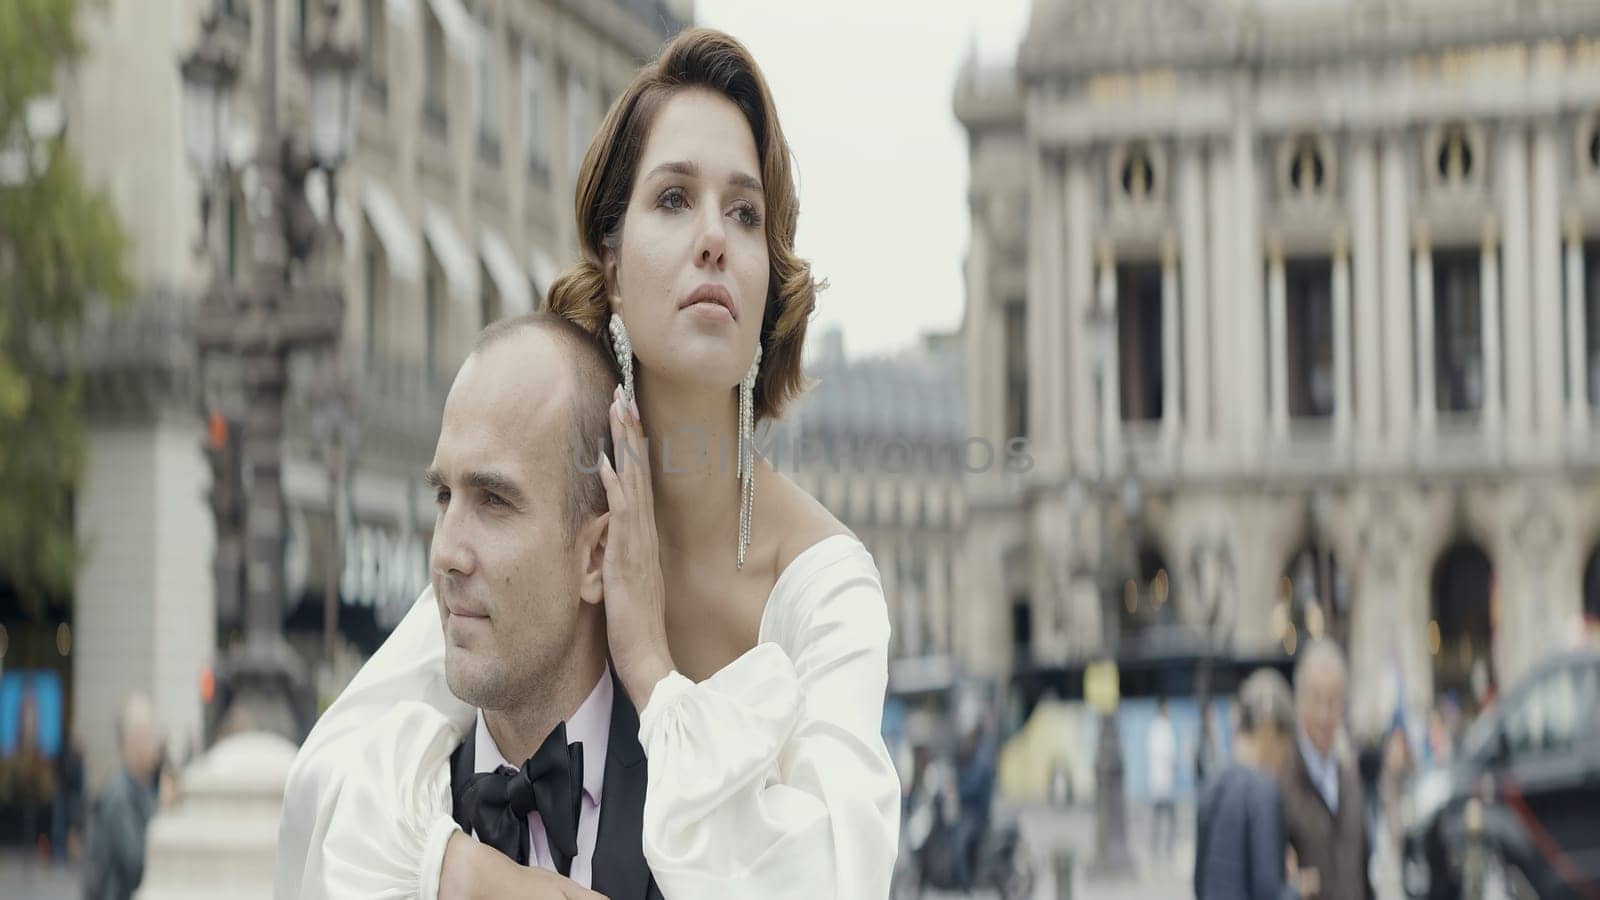 A man picks up his wife in his arms. Action. A date on the street where a girl in a white dress with a beautiful styling who jumps on her hands on a man in a suit in the fresh air. High quality 4k footage